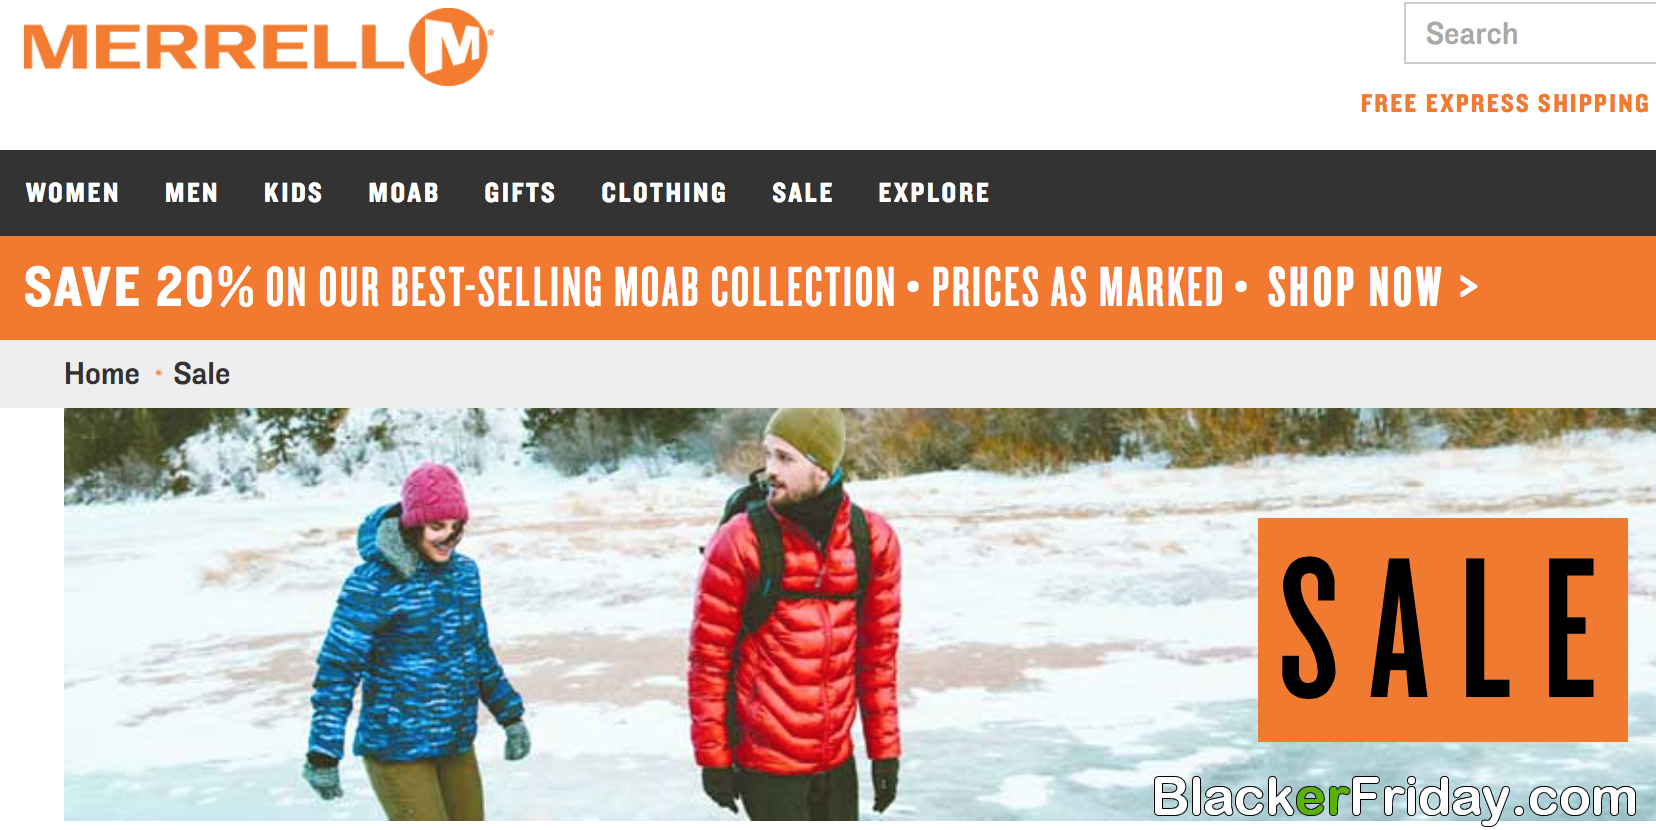 Merrell Black Friday Sale 217 Online Sale, TO 54% OFF